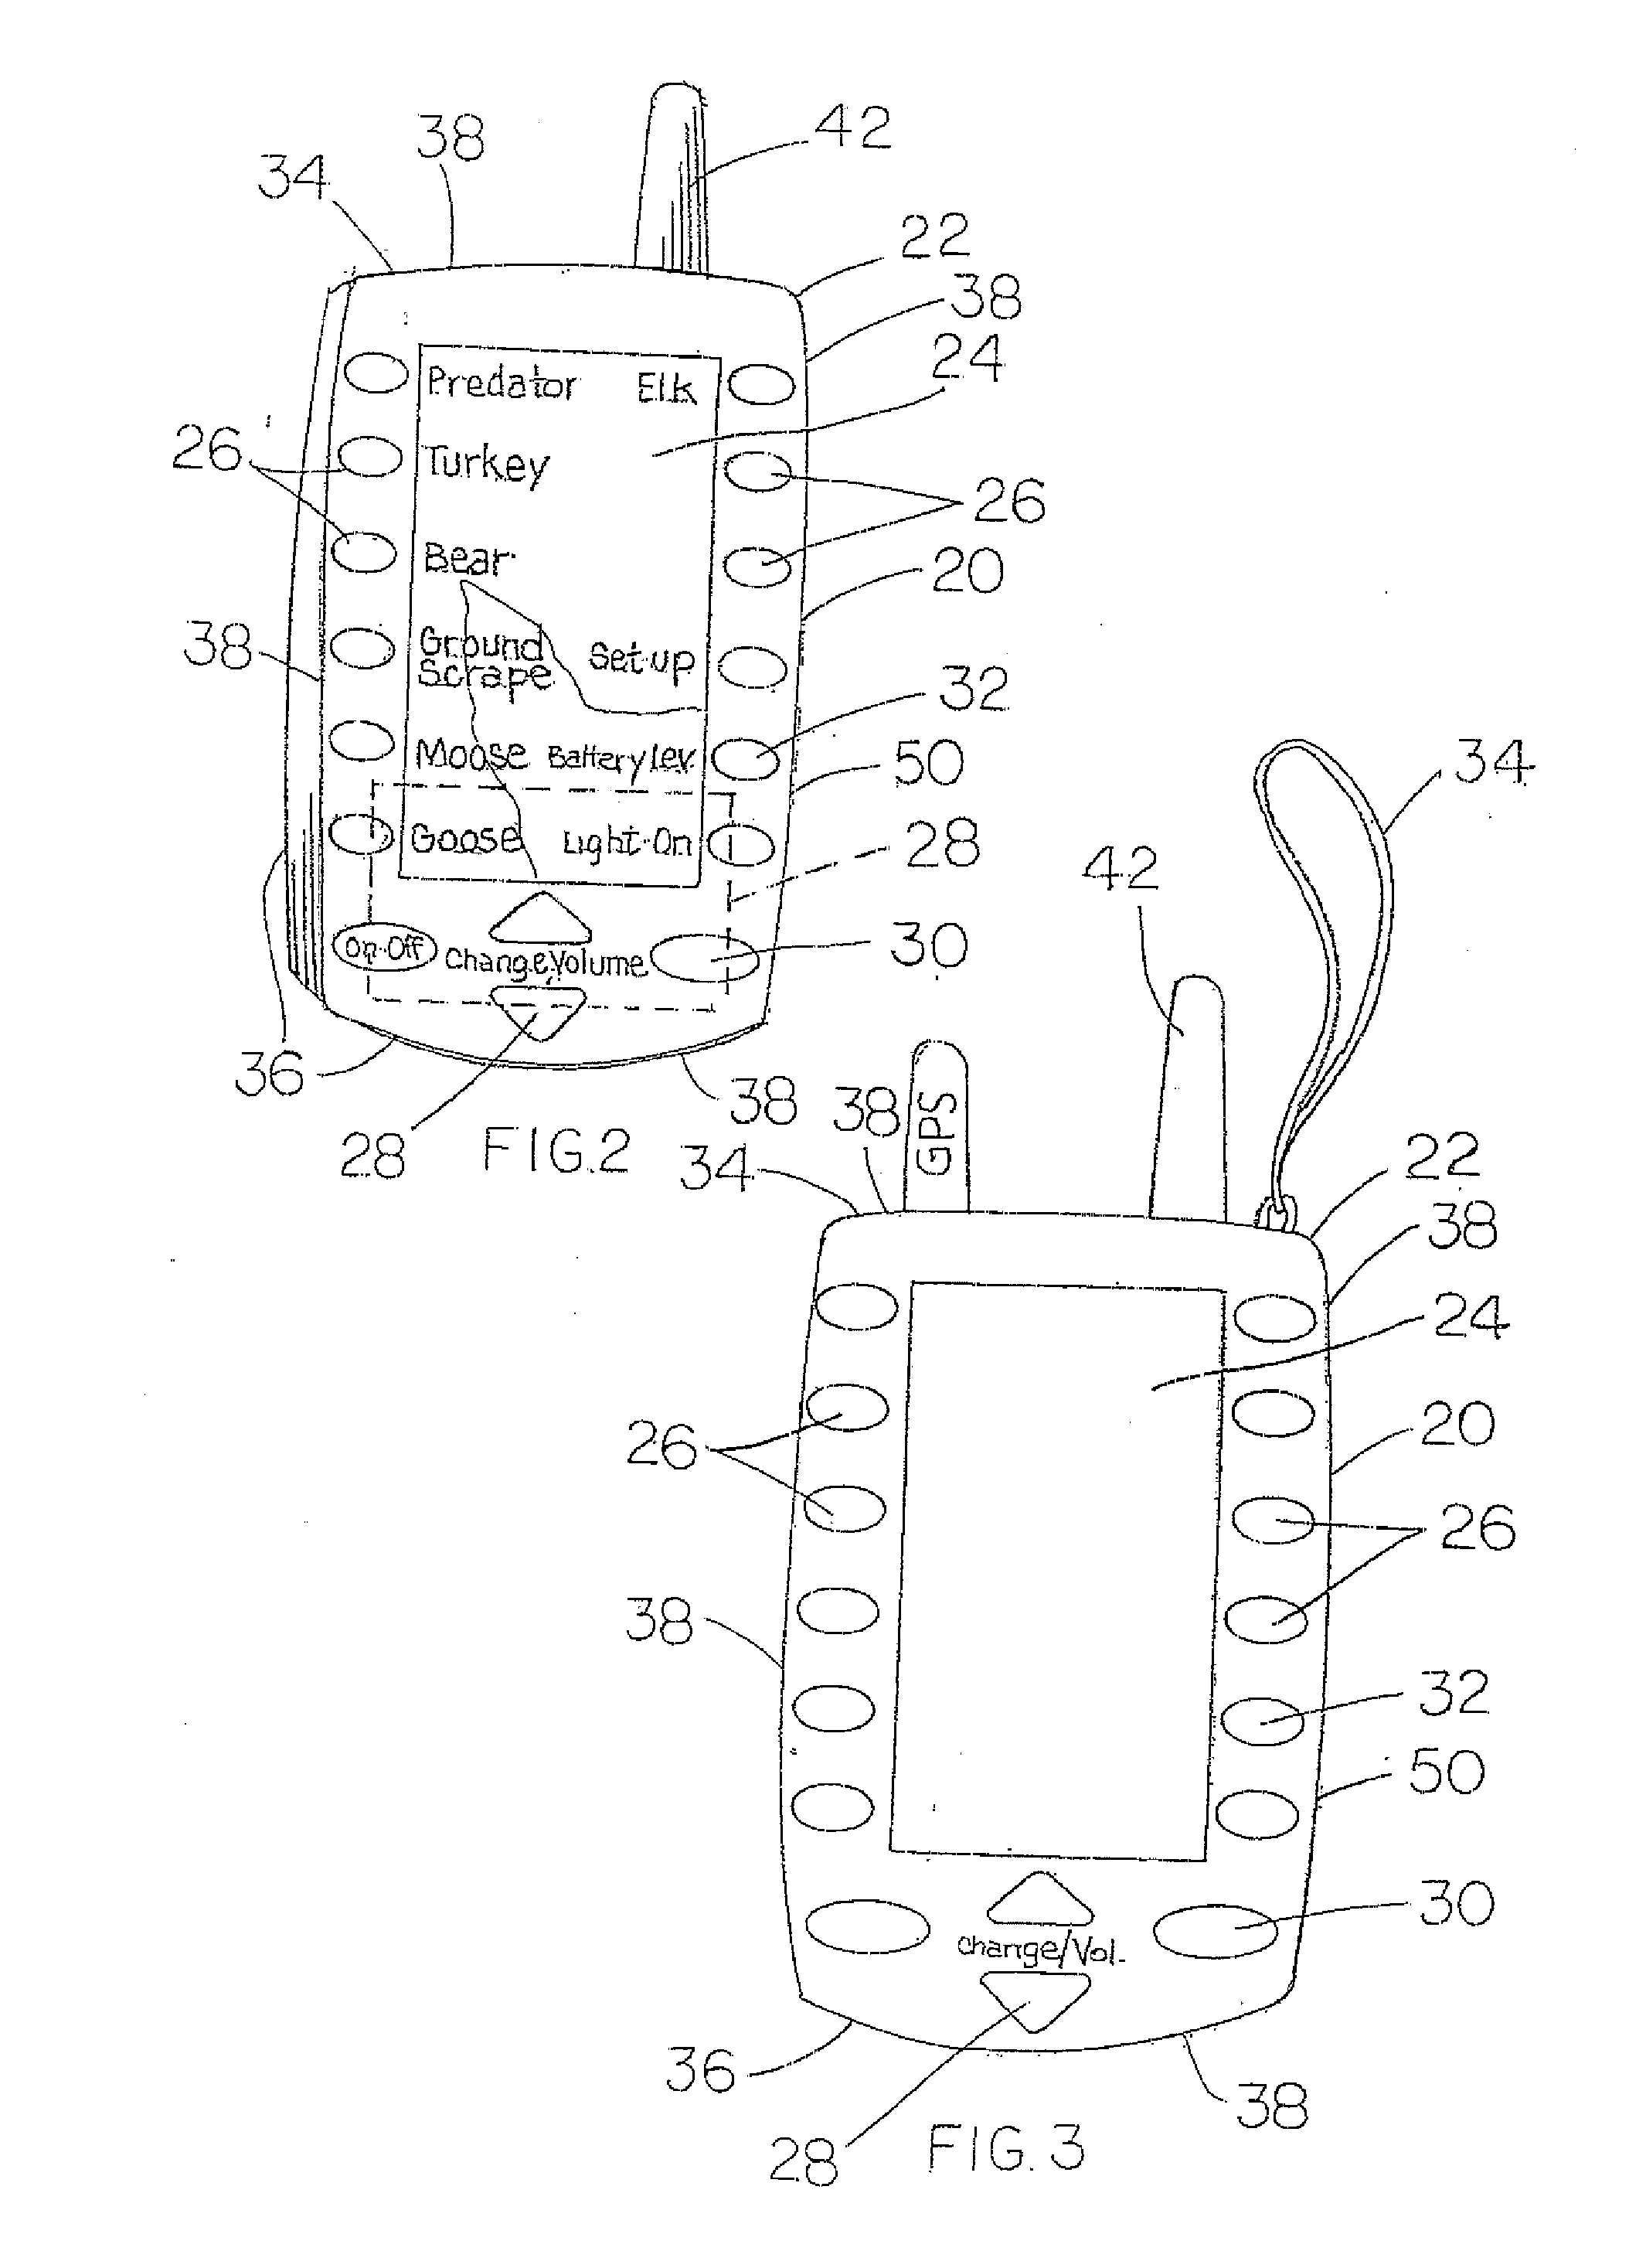 Remotely Operable Game Call or Monitoring Apparatus